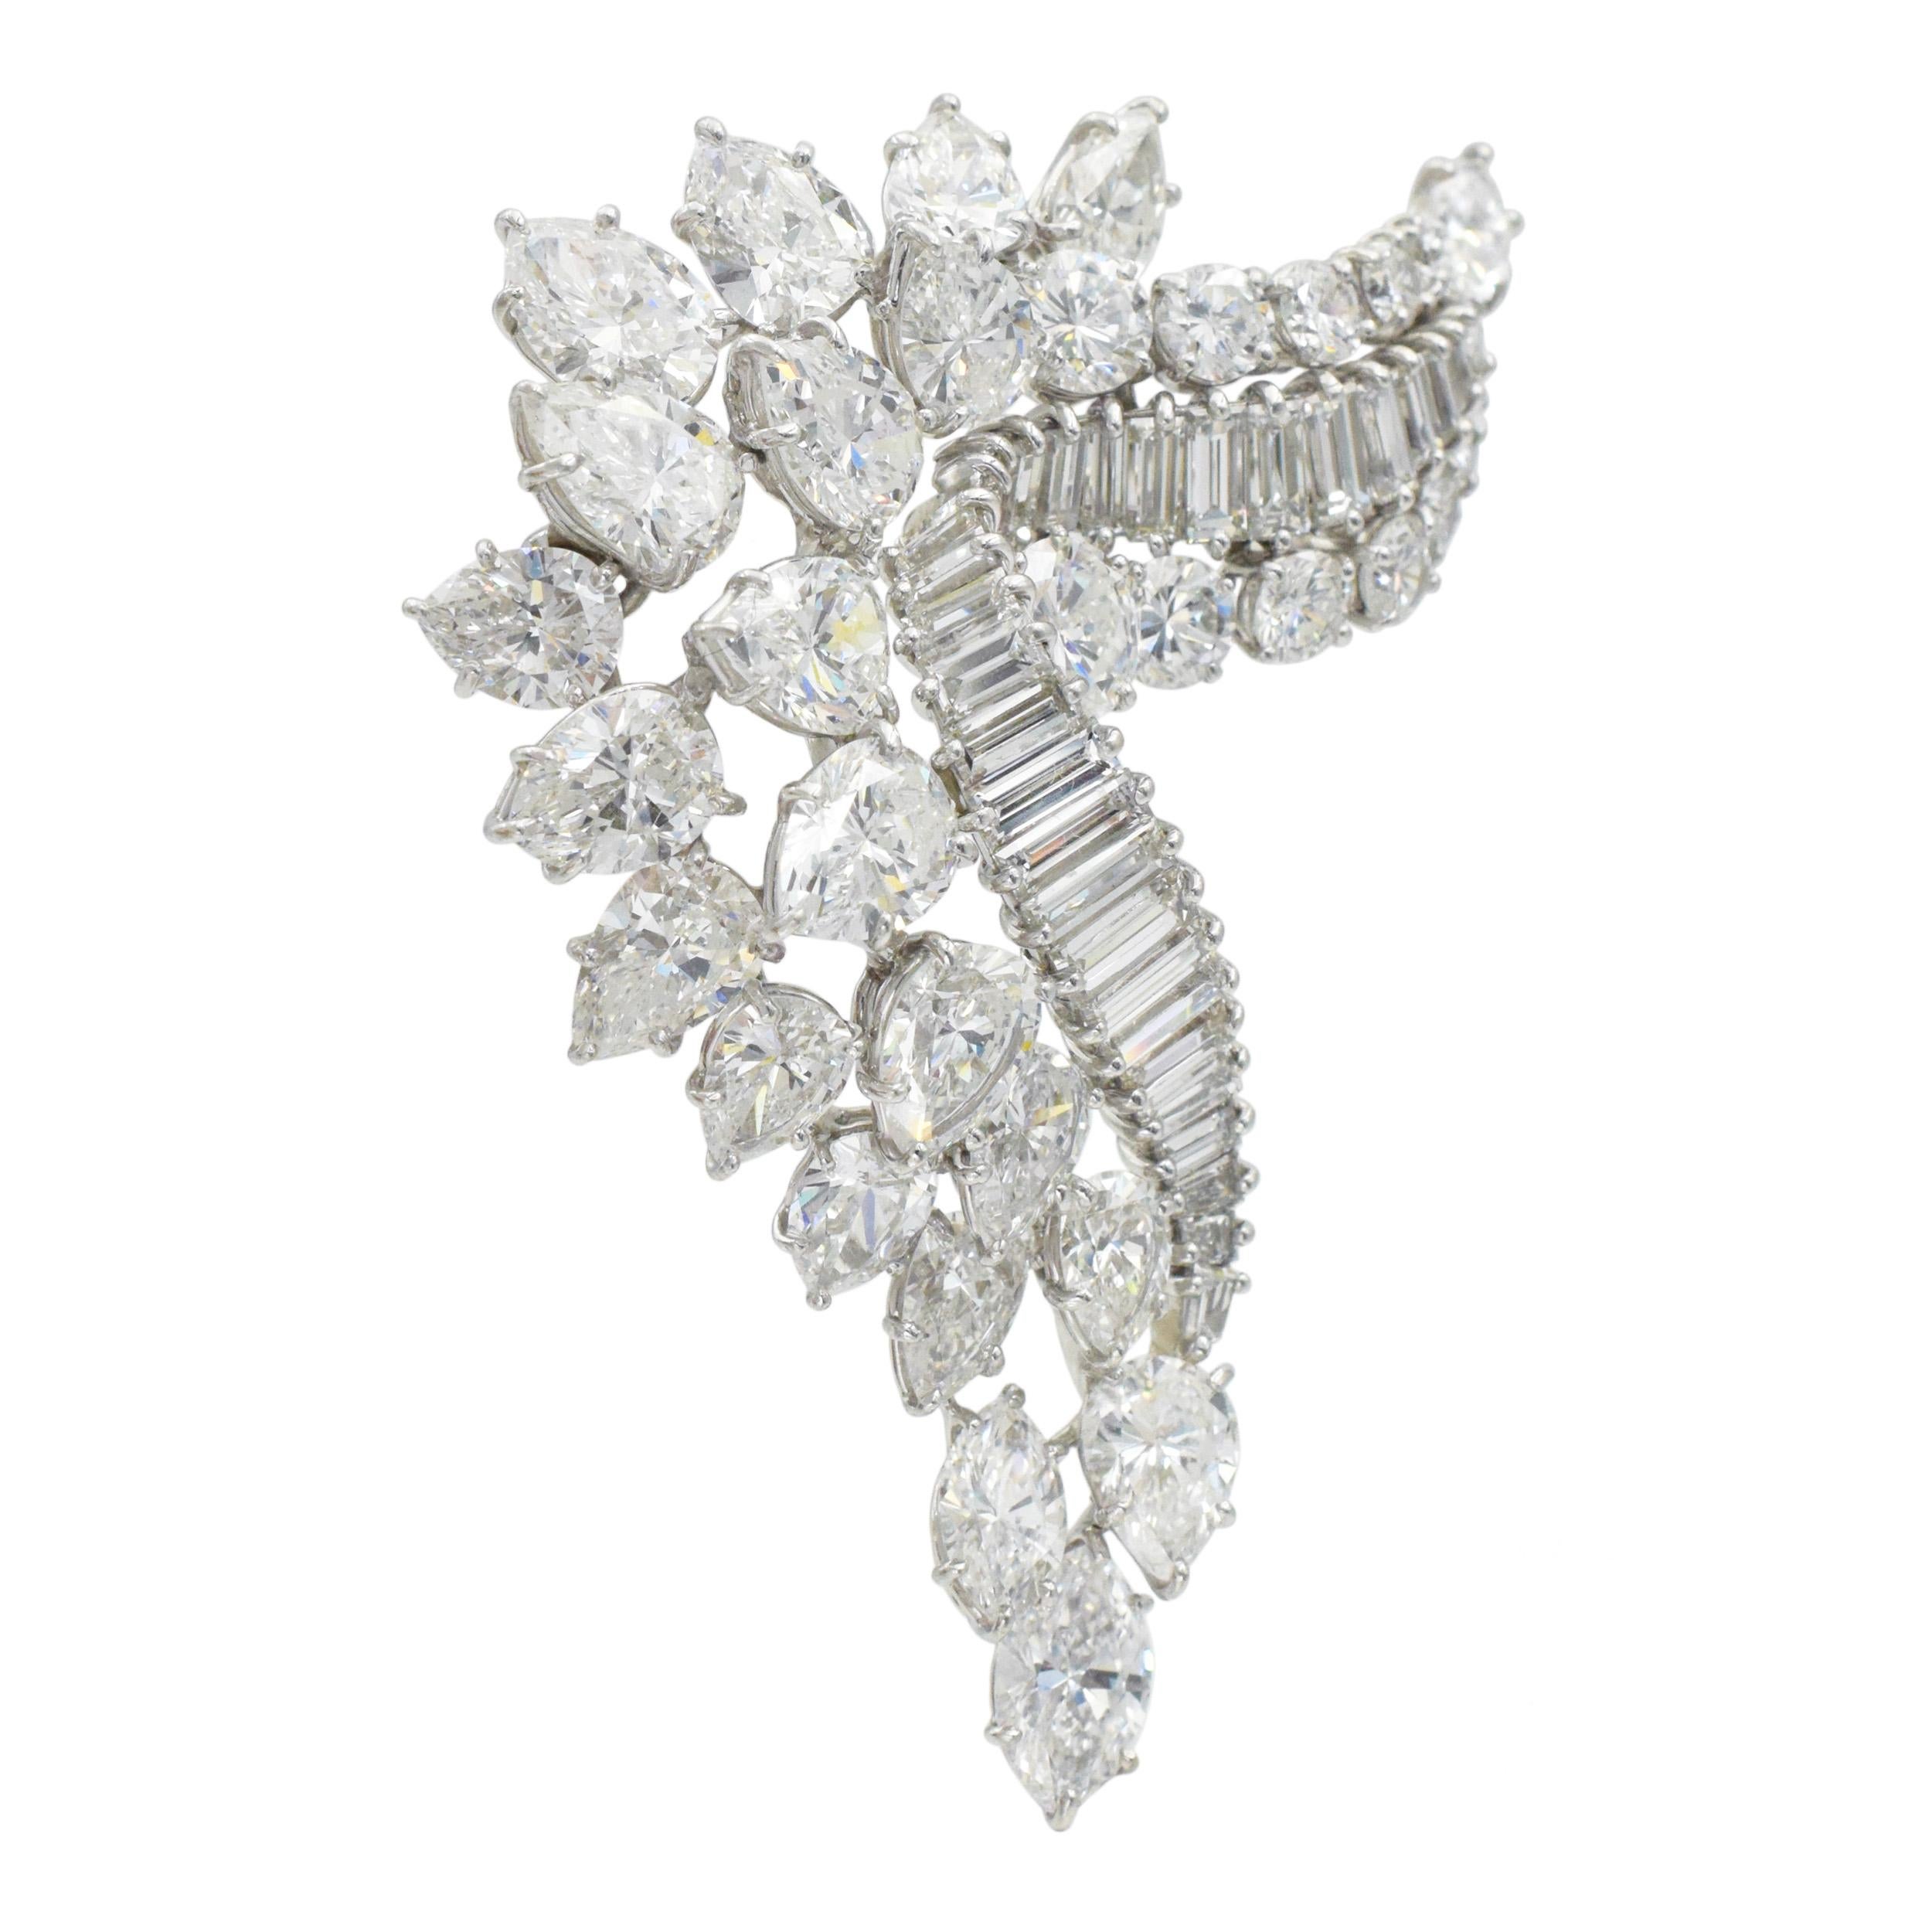 Classic, Harry Winston Diamond Brooch in Platinum. Circa 1965. The brooch is set with 20 pear shape diamonds with total weight of 12.72 carats, 12 round brilliant cut diamonds with total weight of 2.73 carats, 2 marquise cut diamonds with total